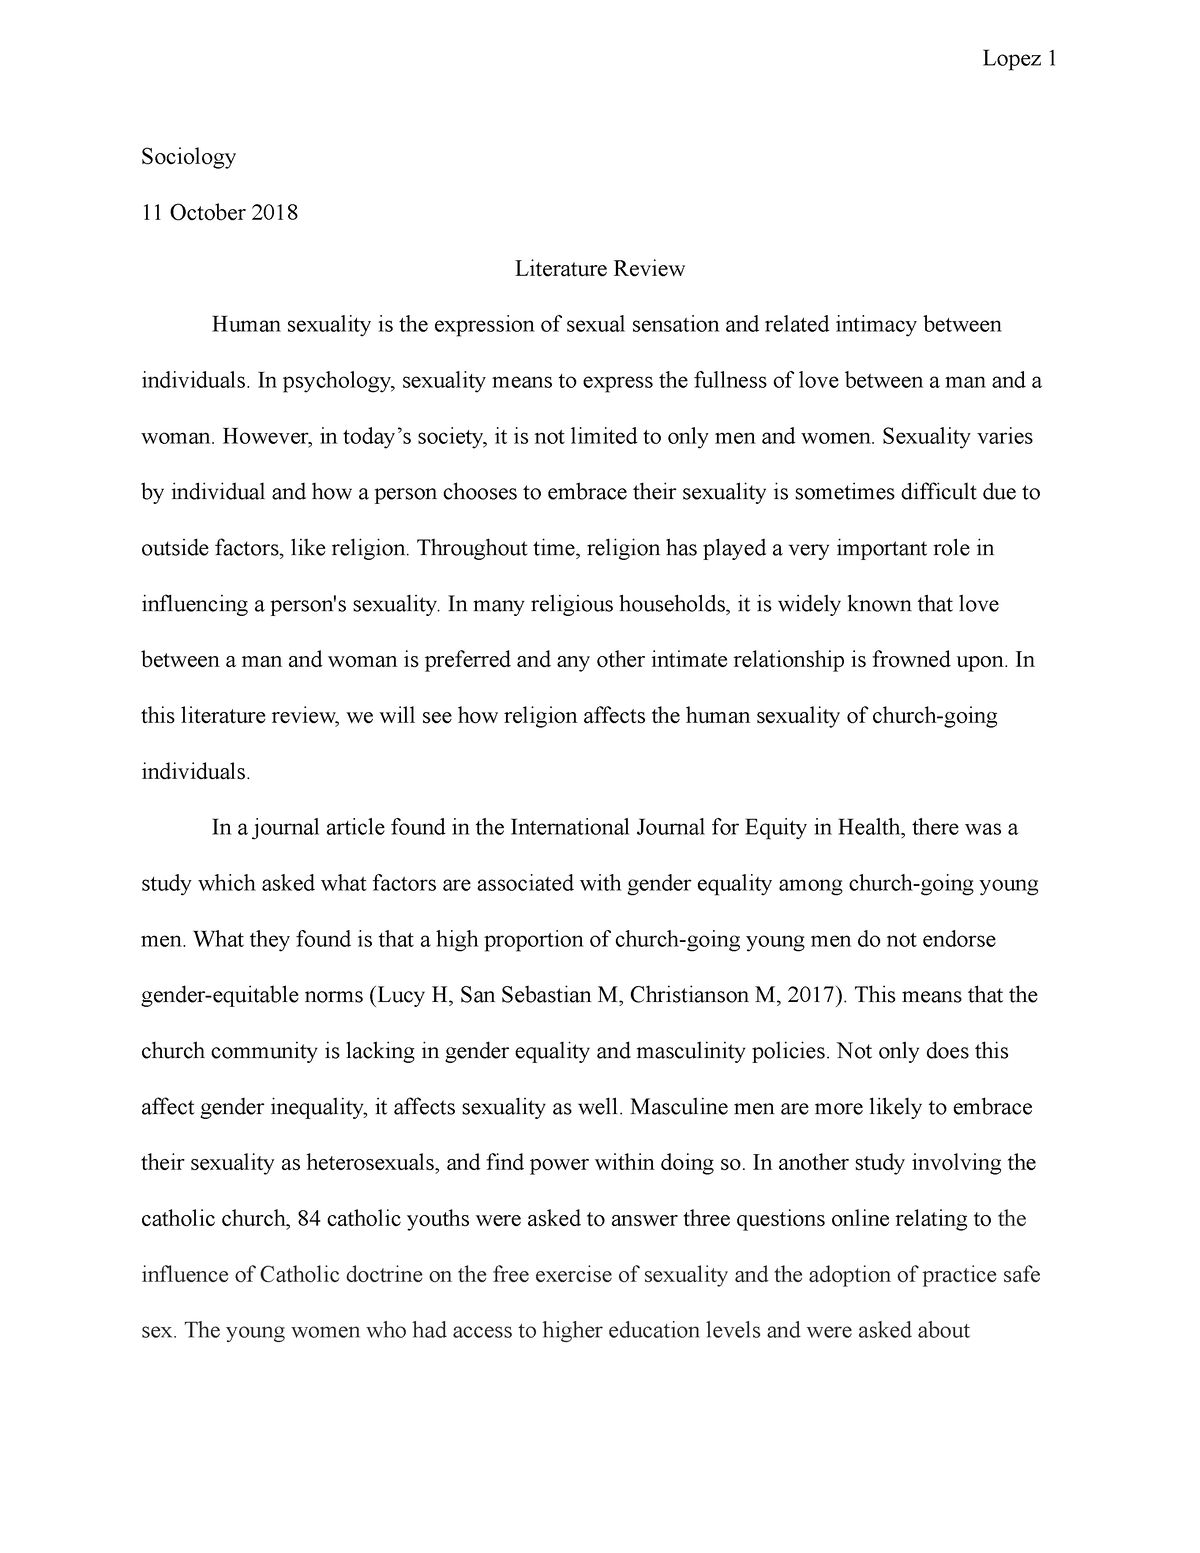 literature review sociology study